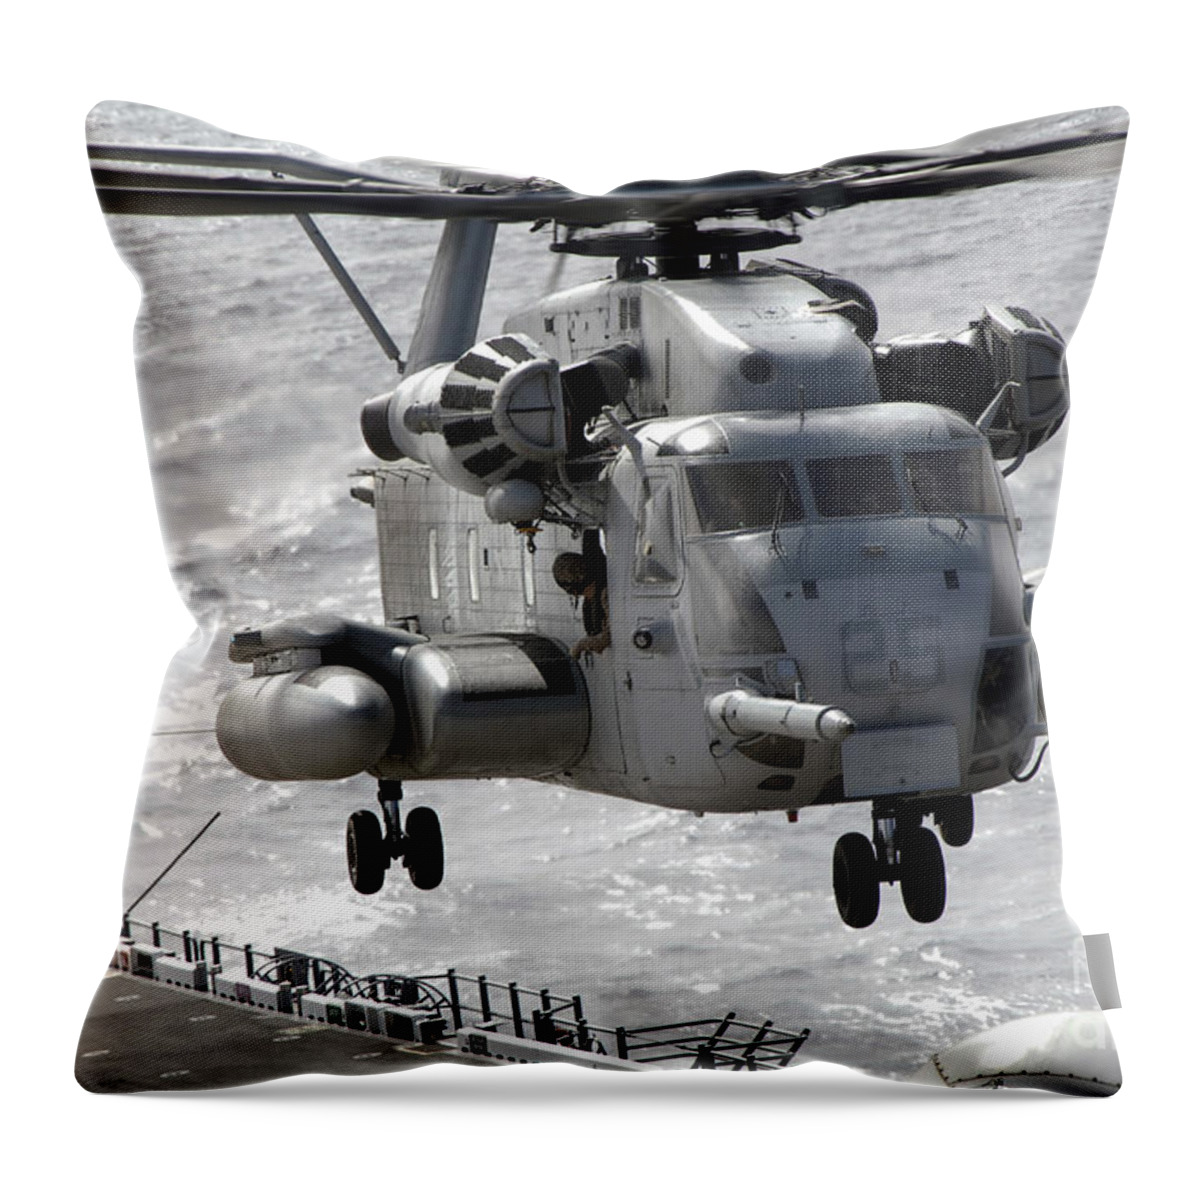 Helicopter Throw Pillow featuring the photograph A Ch-53e Super Stallion Helicopter #2 by Stocktrek Images